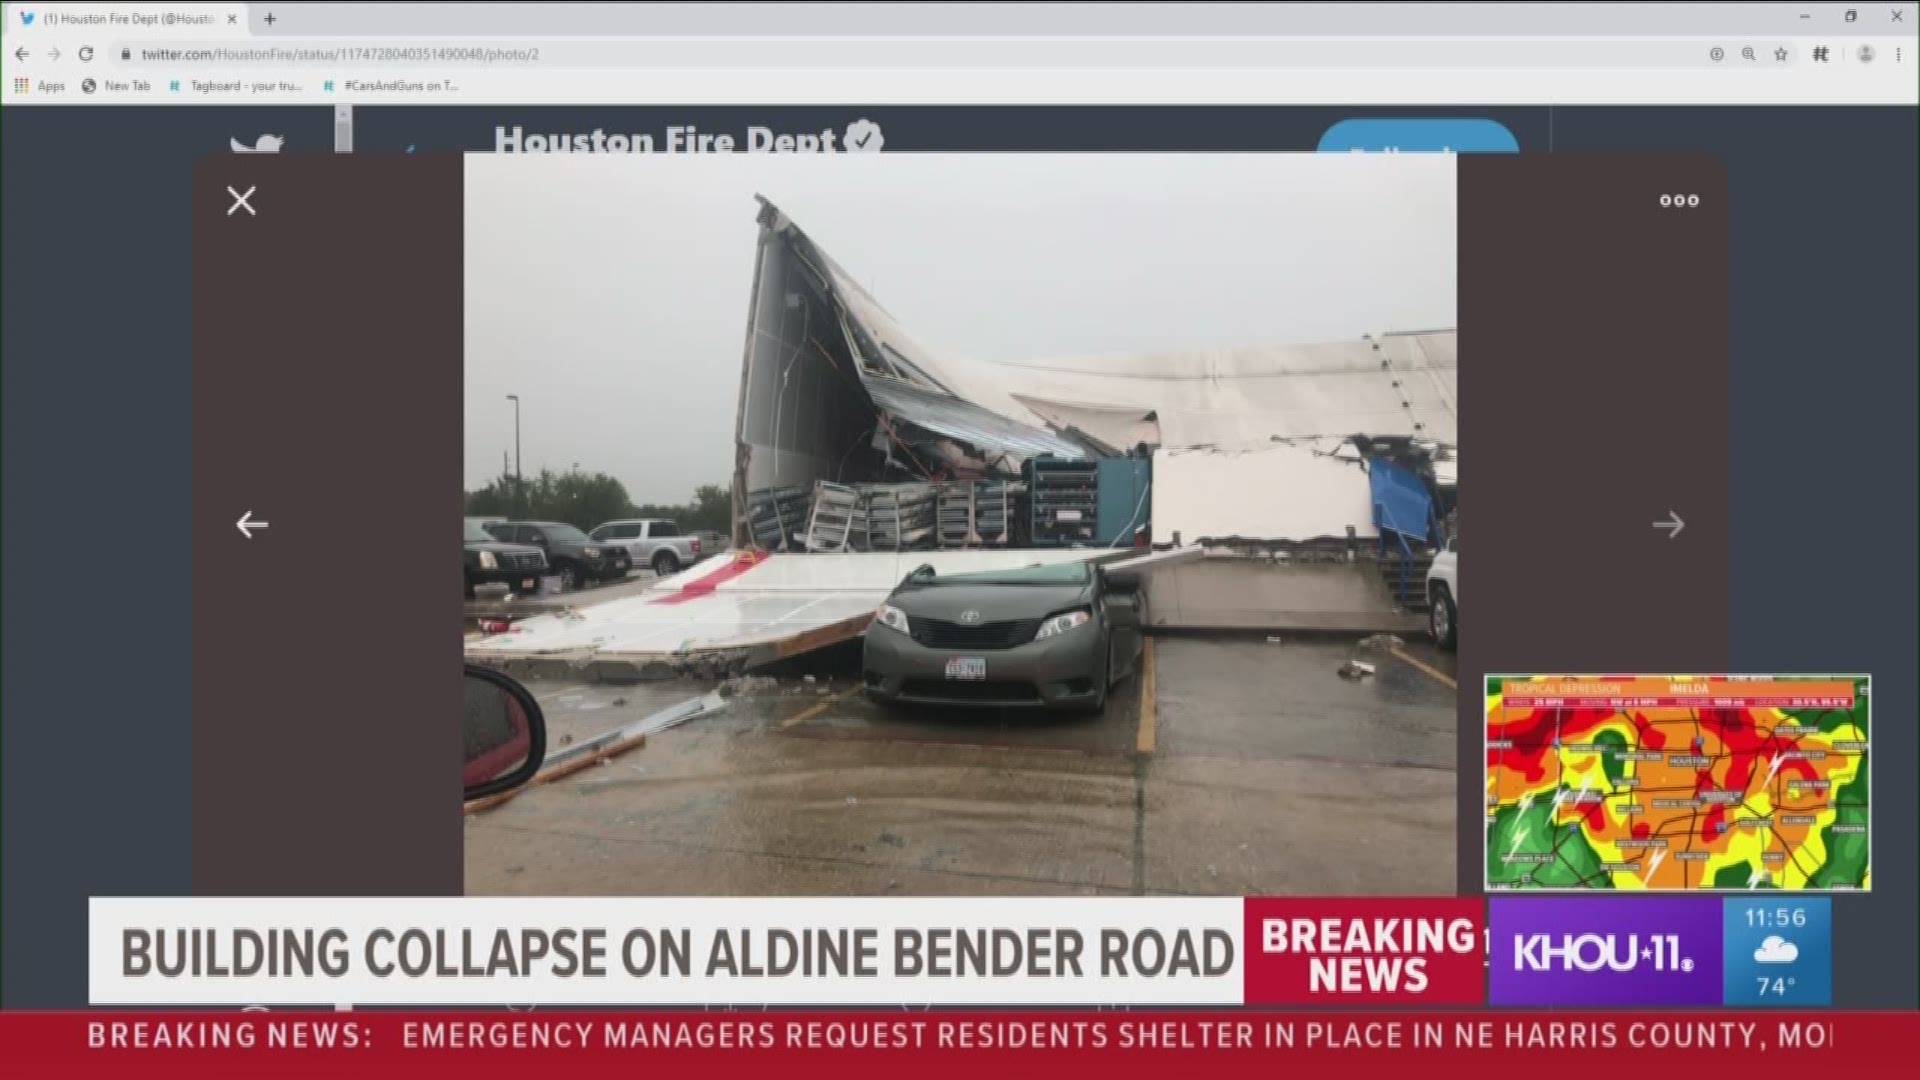 They suffered minor injuries, according to the Houston Fire Department, during a partial building collapse at a mail distribution facility on Aldine Bender.